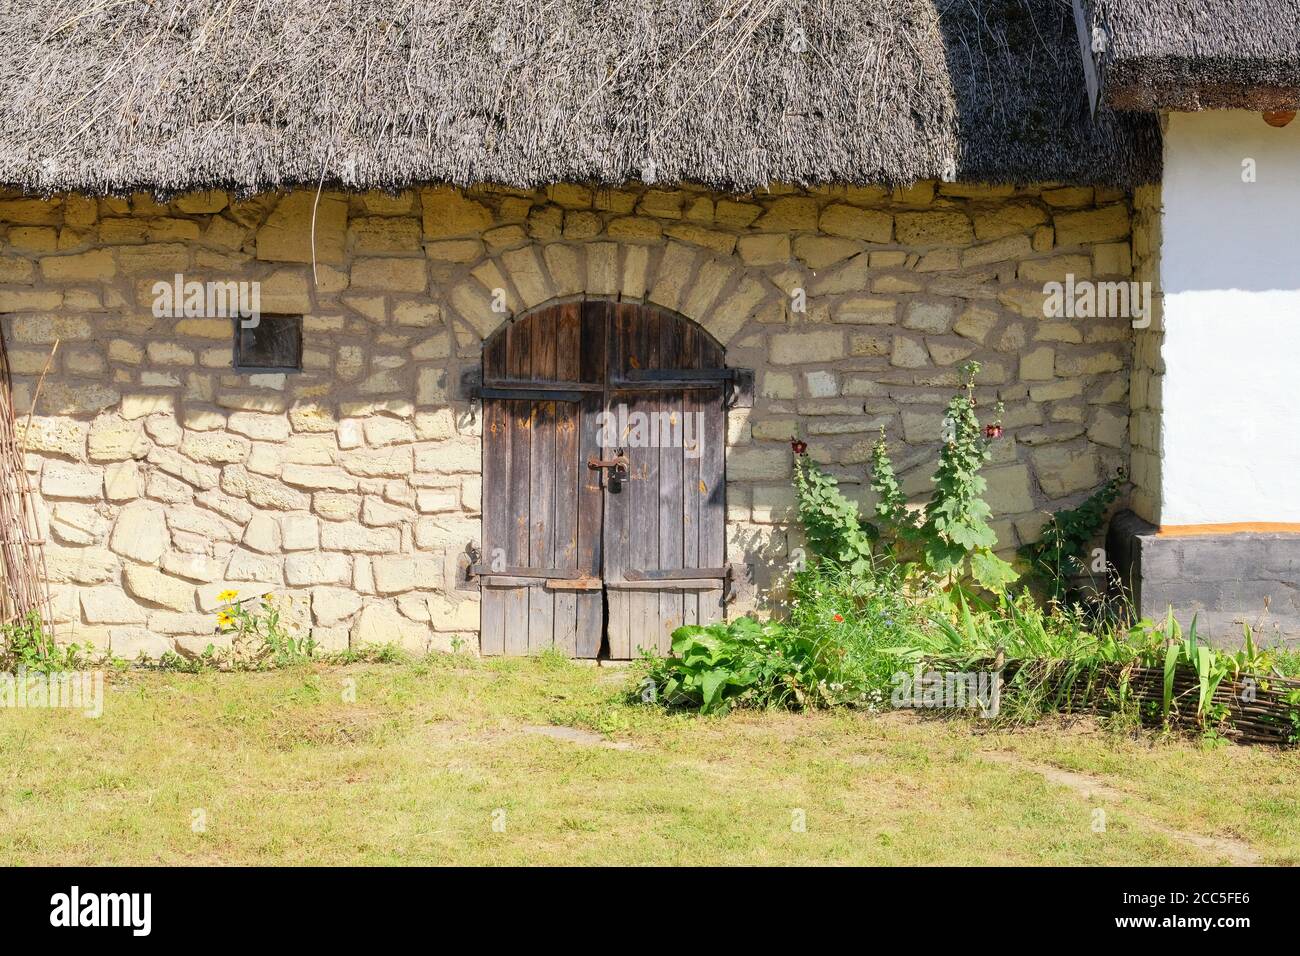 Old rural house with thatched roof. Village is preserving rustic traditions and culture. Stock Photo